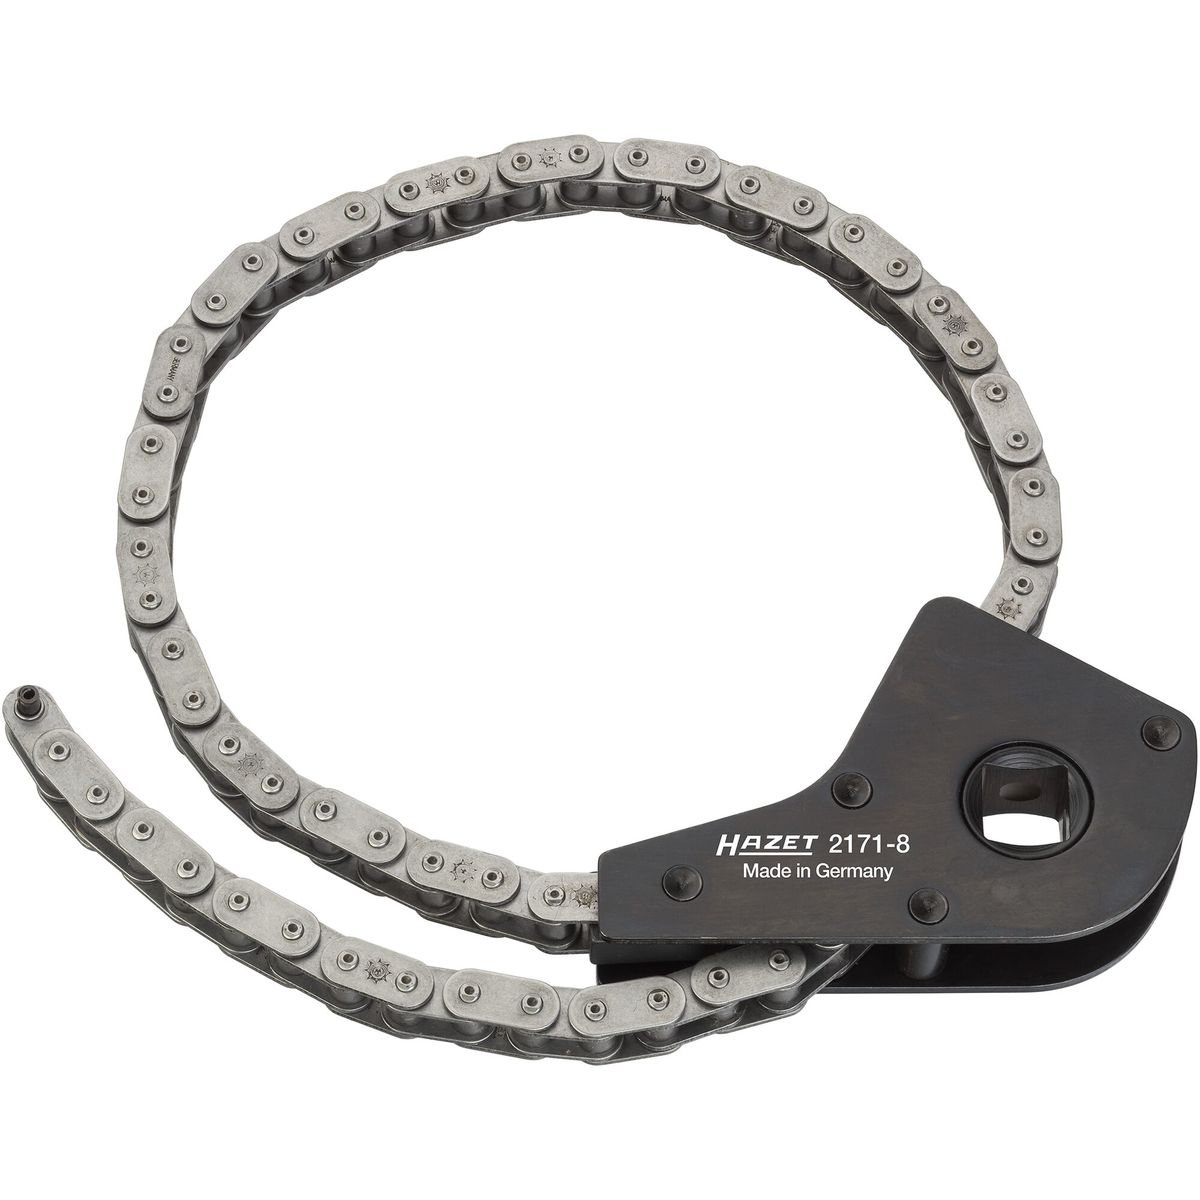 Oil Filter Chain Wrench No.2171-8 Hazet®